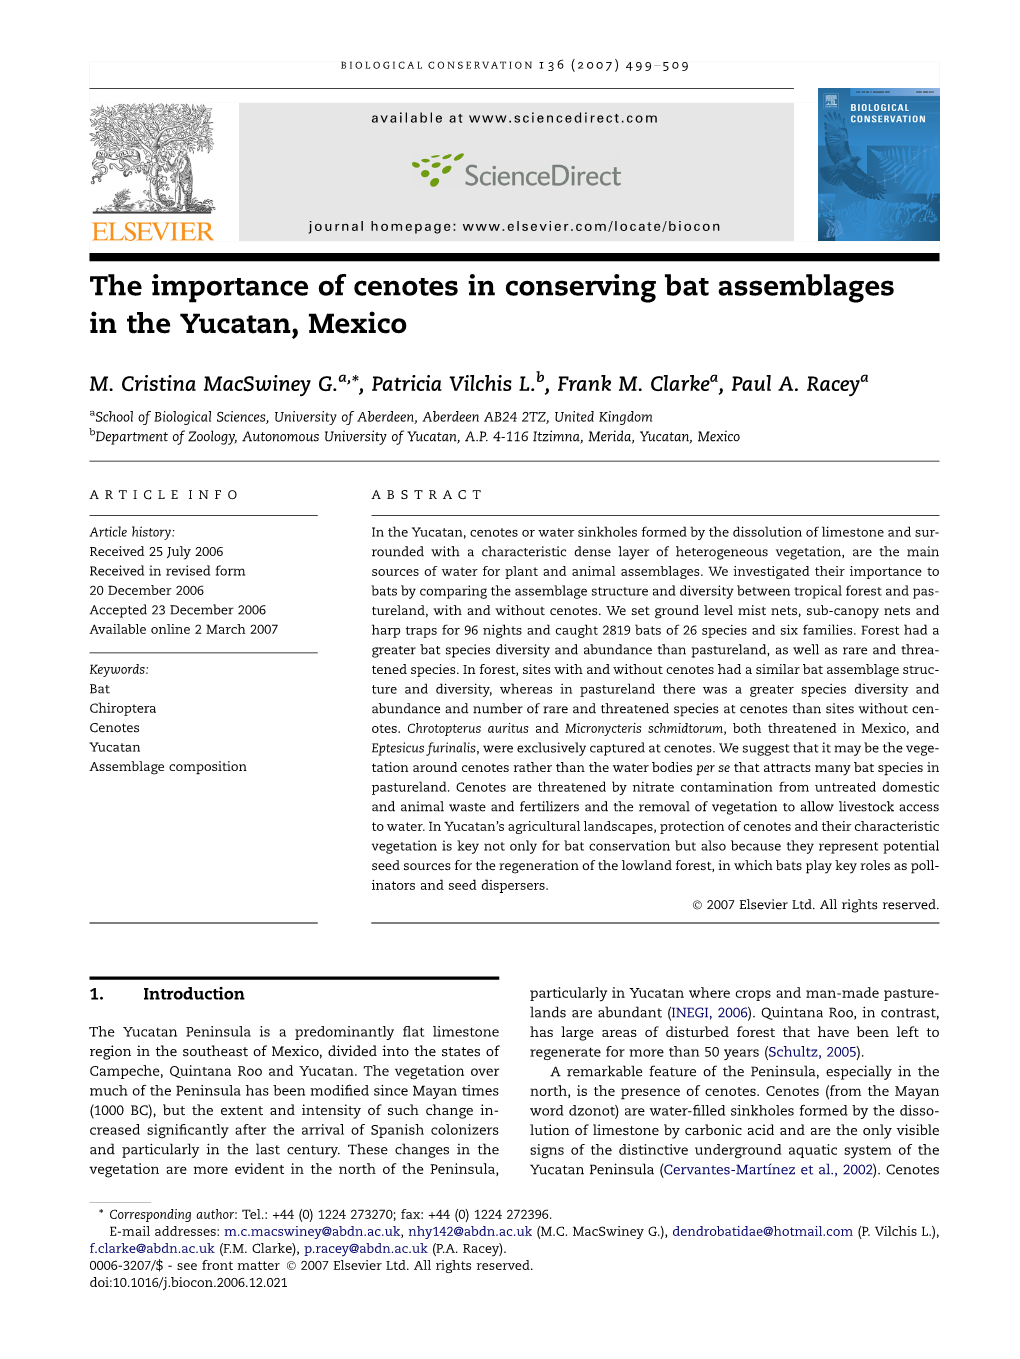 The Importance of Cenotes in Conserving Bat Assemblages in the Yucatan, Mexico